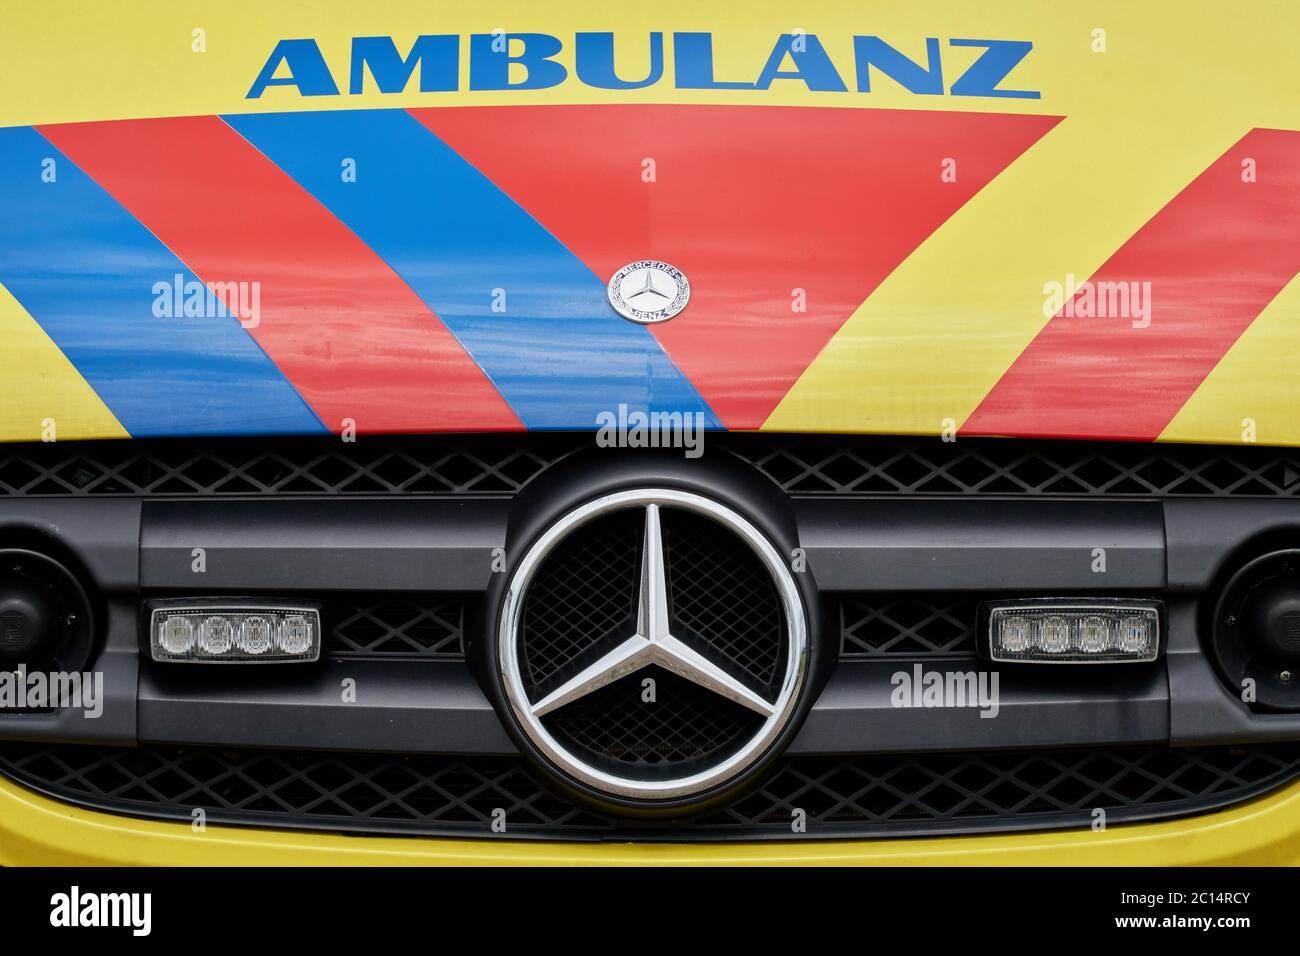 Close-up of front of yellow ambulance van with red and blue stripes, emergency vehicle with led lights Stock Photo